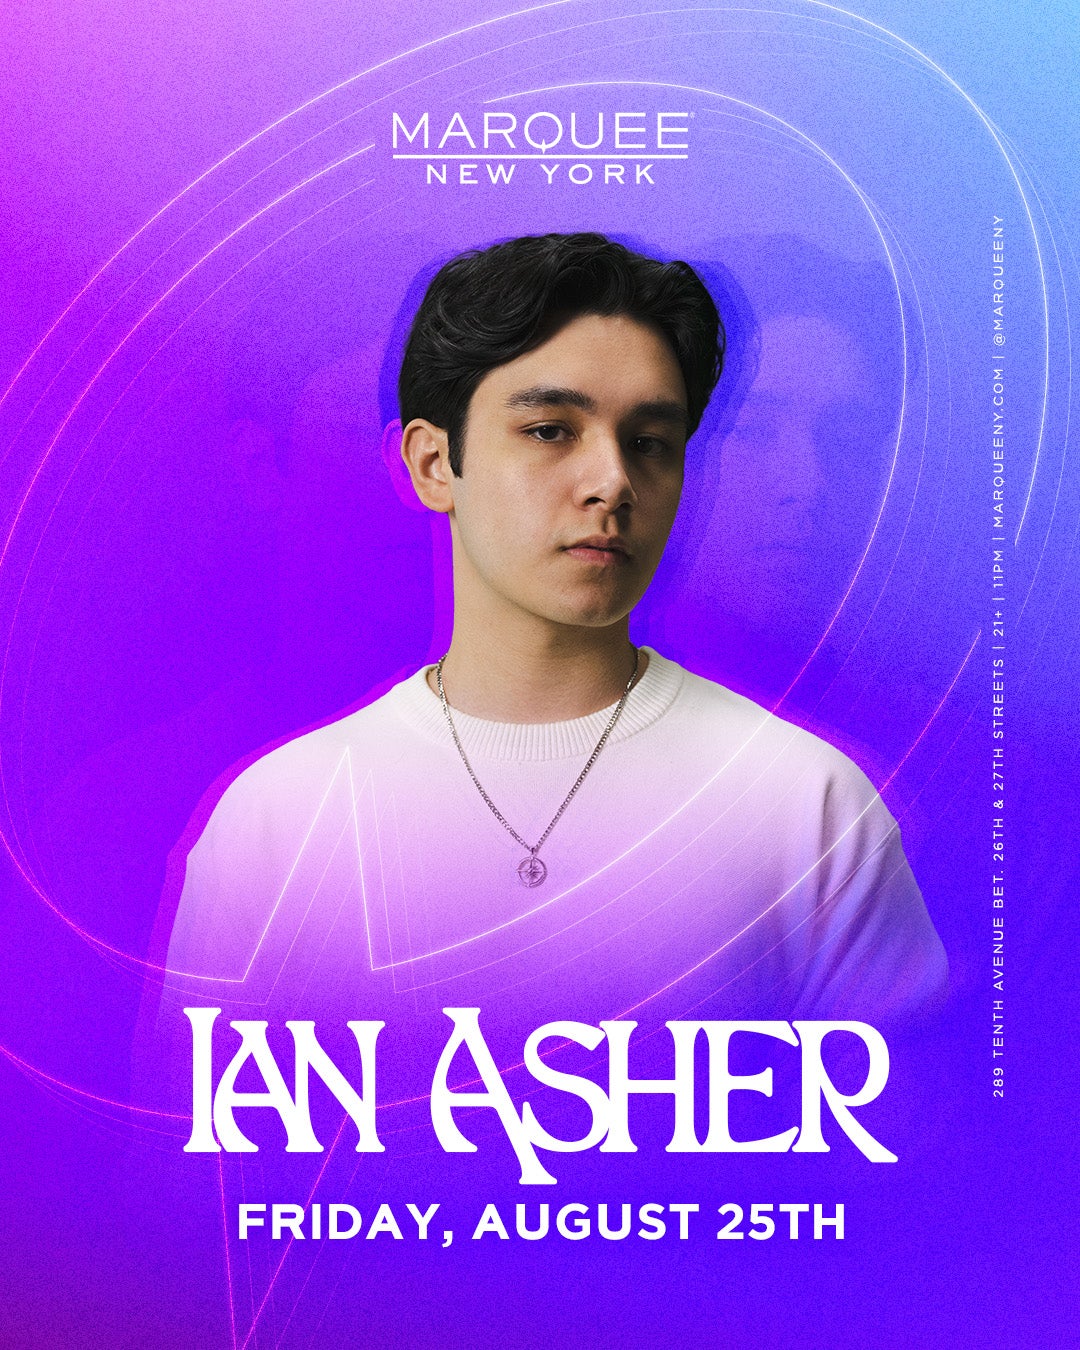 8/25/23 – Ian Asher – Marquee New York